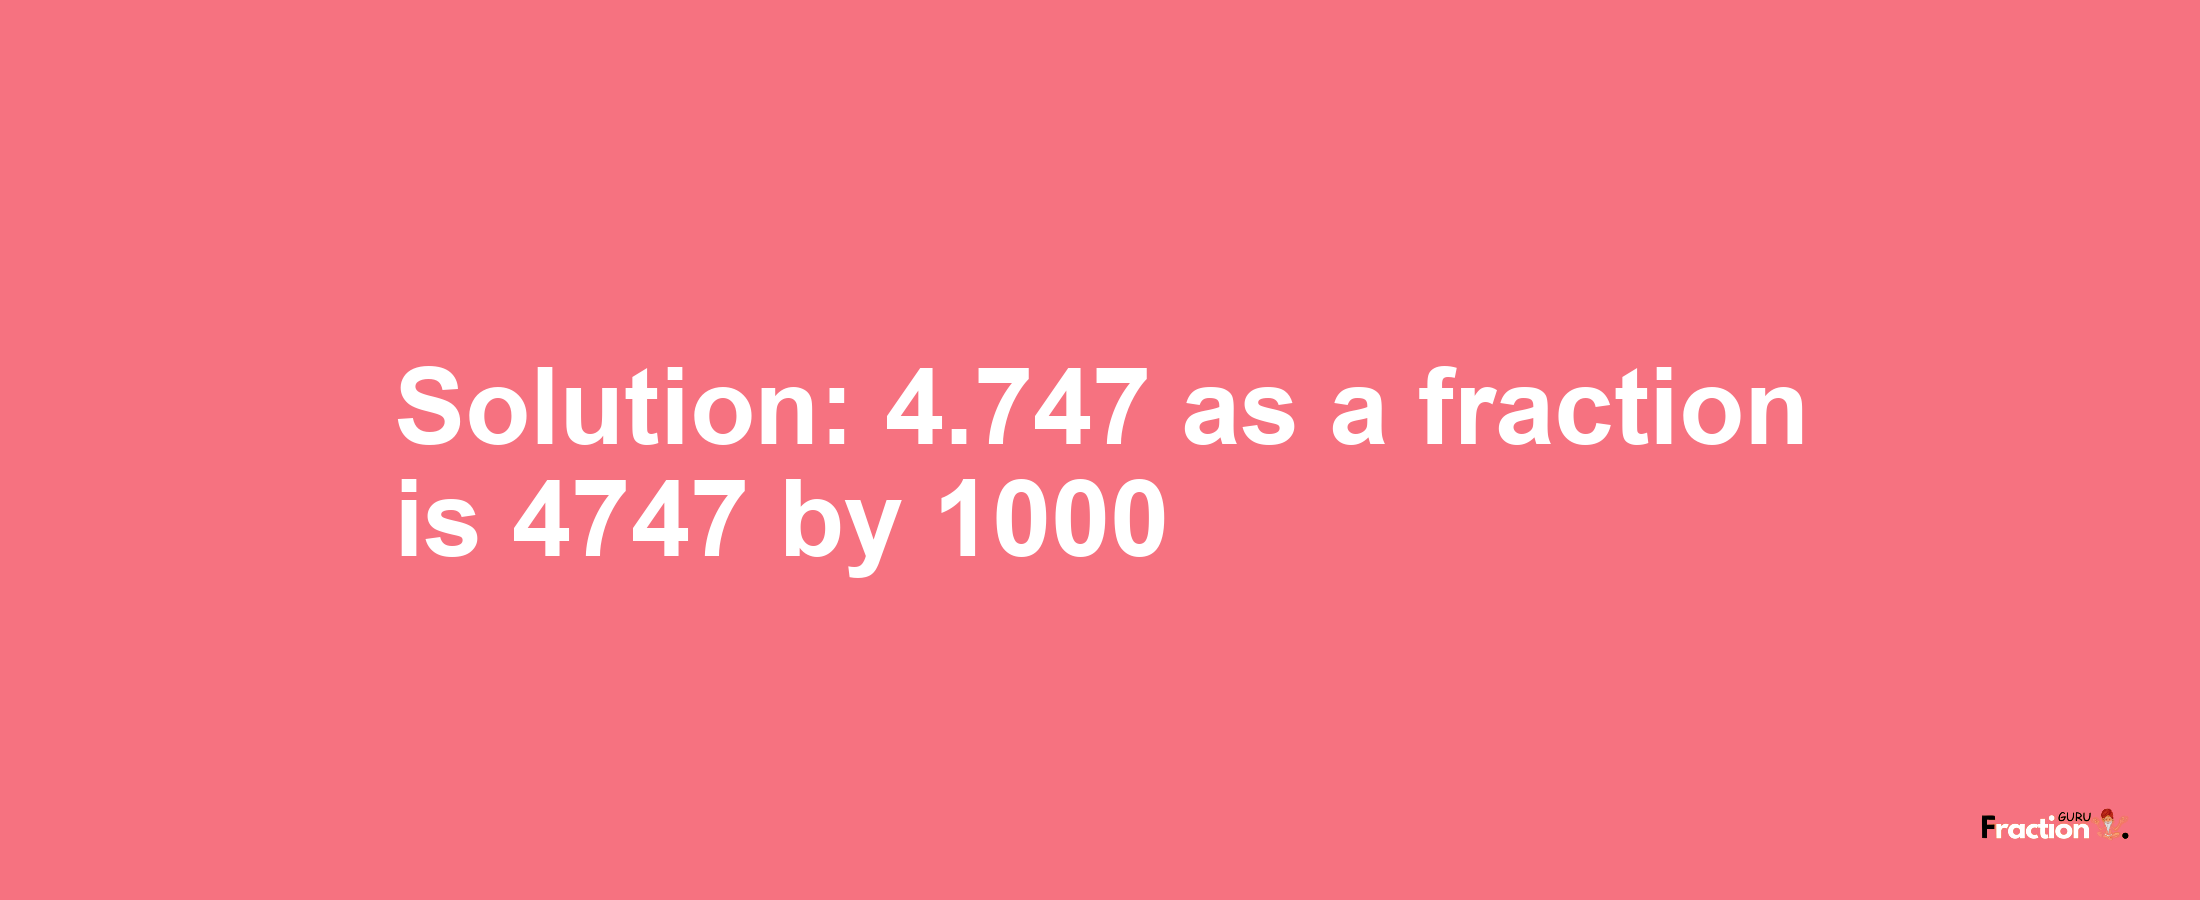 Solution:4.747 as a fraction is 4747/1000